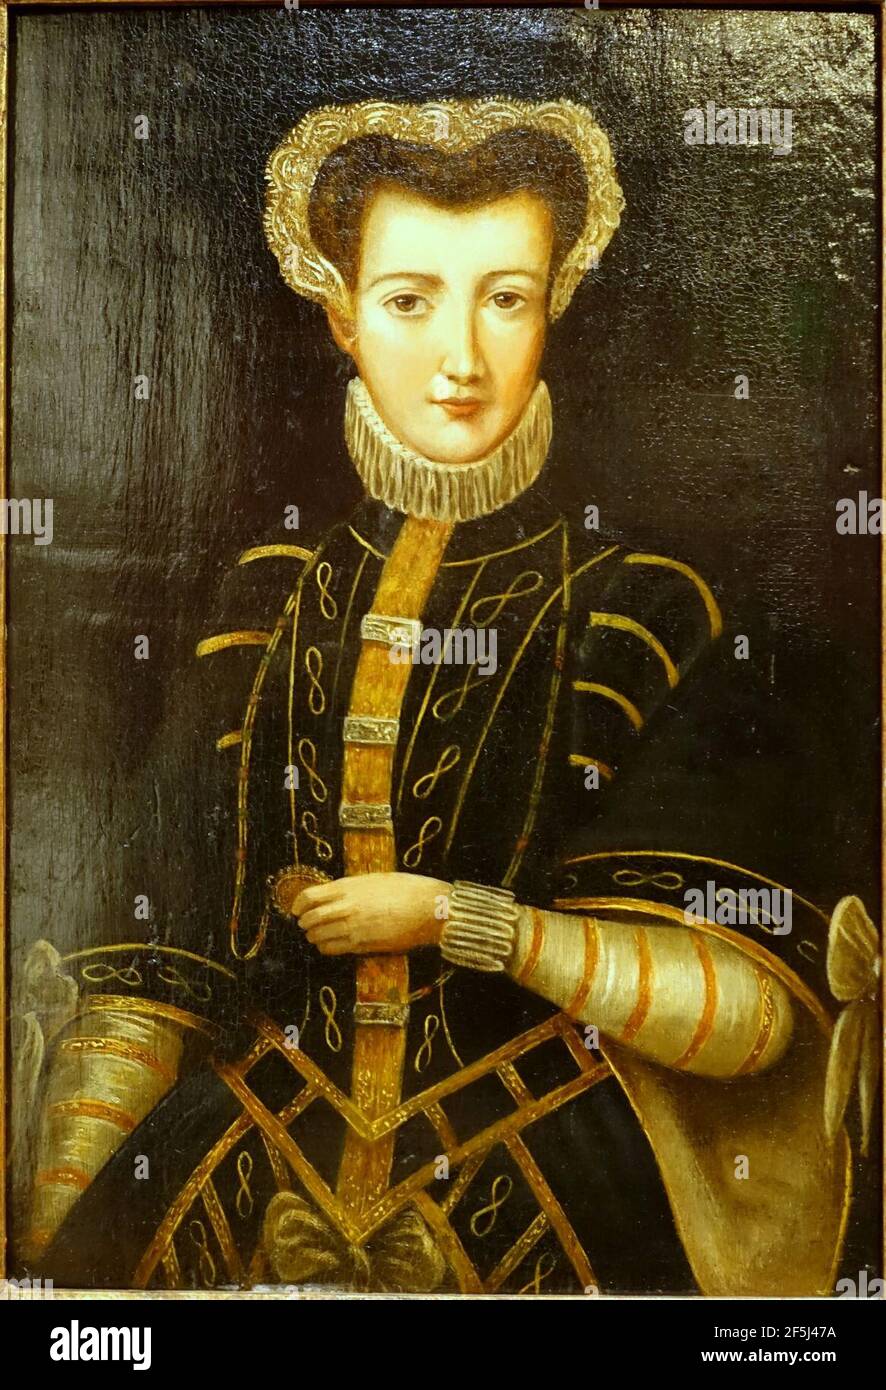 Queen Margaret of France, attributed to the studio of Corneille de Lyon, 1580, Stock Photo